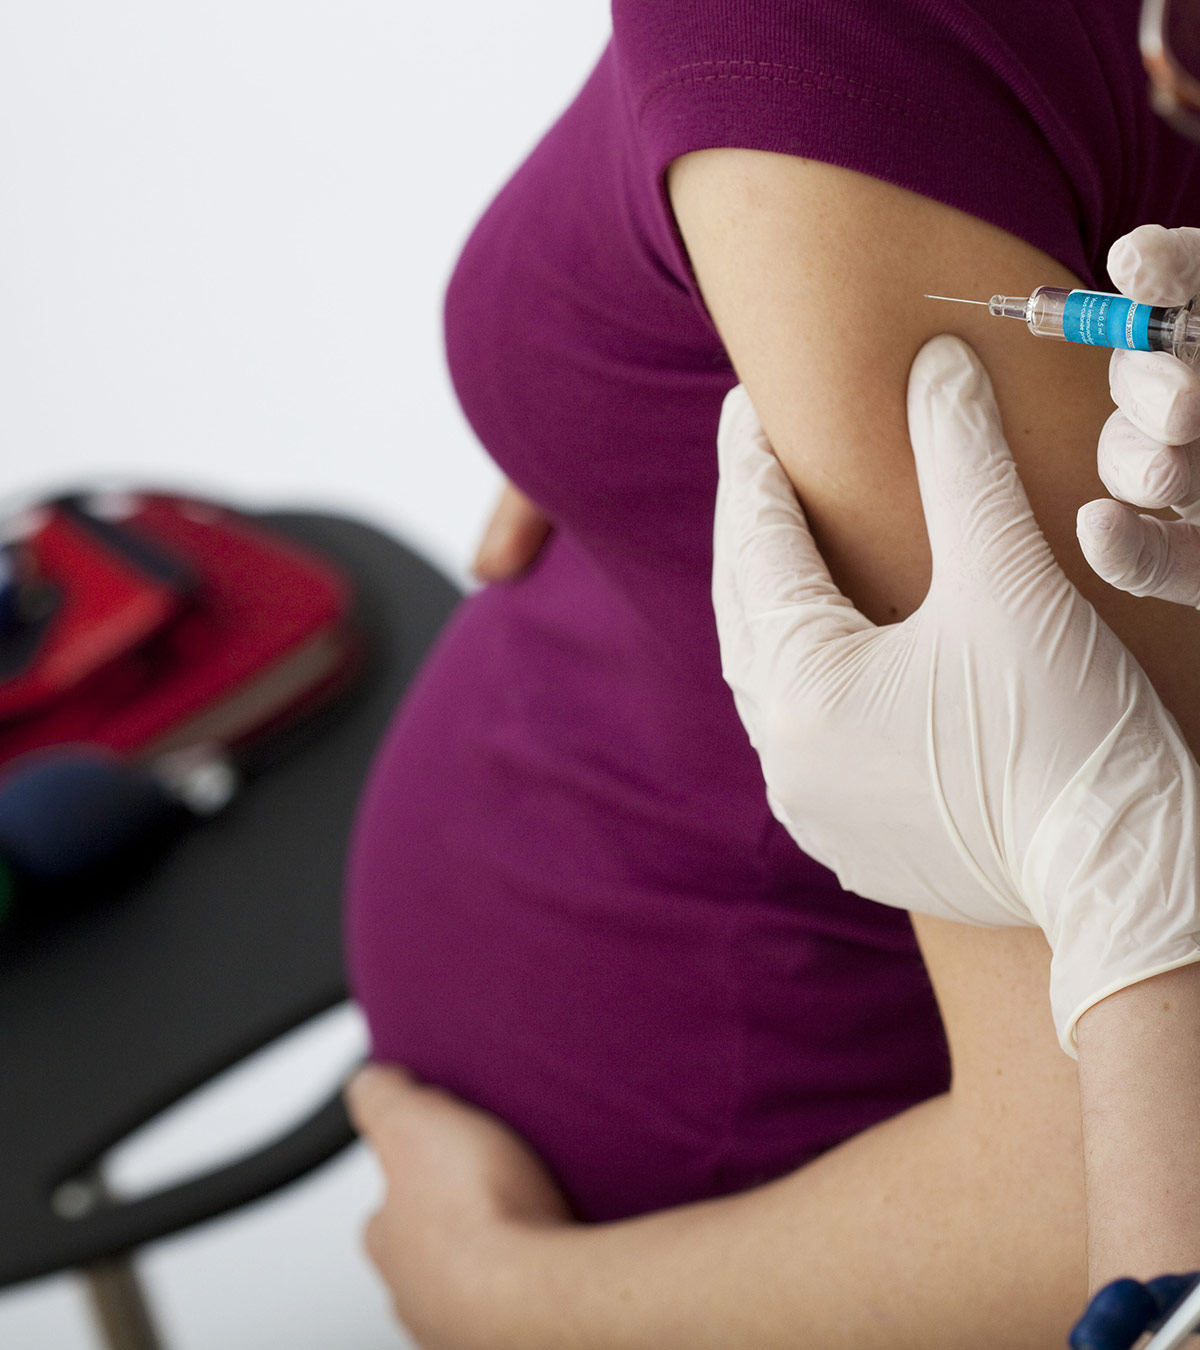 TT Injection In Pregnancy: Safety, Dosage And Side Effects